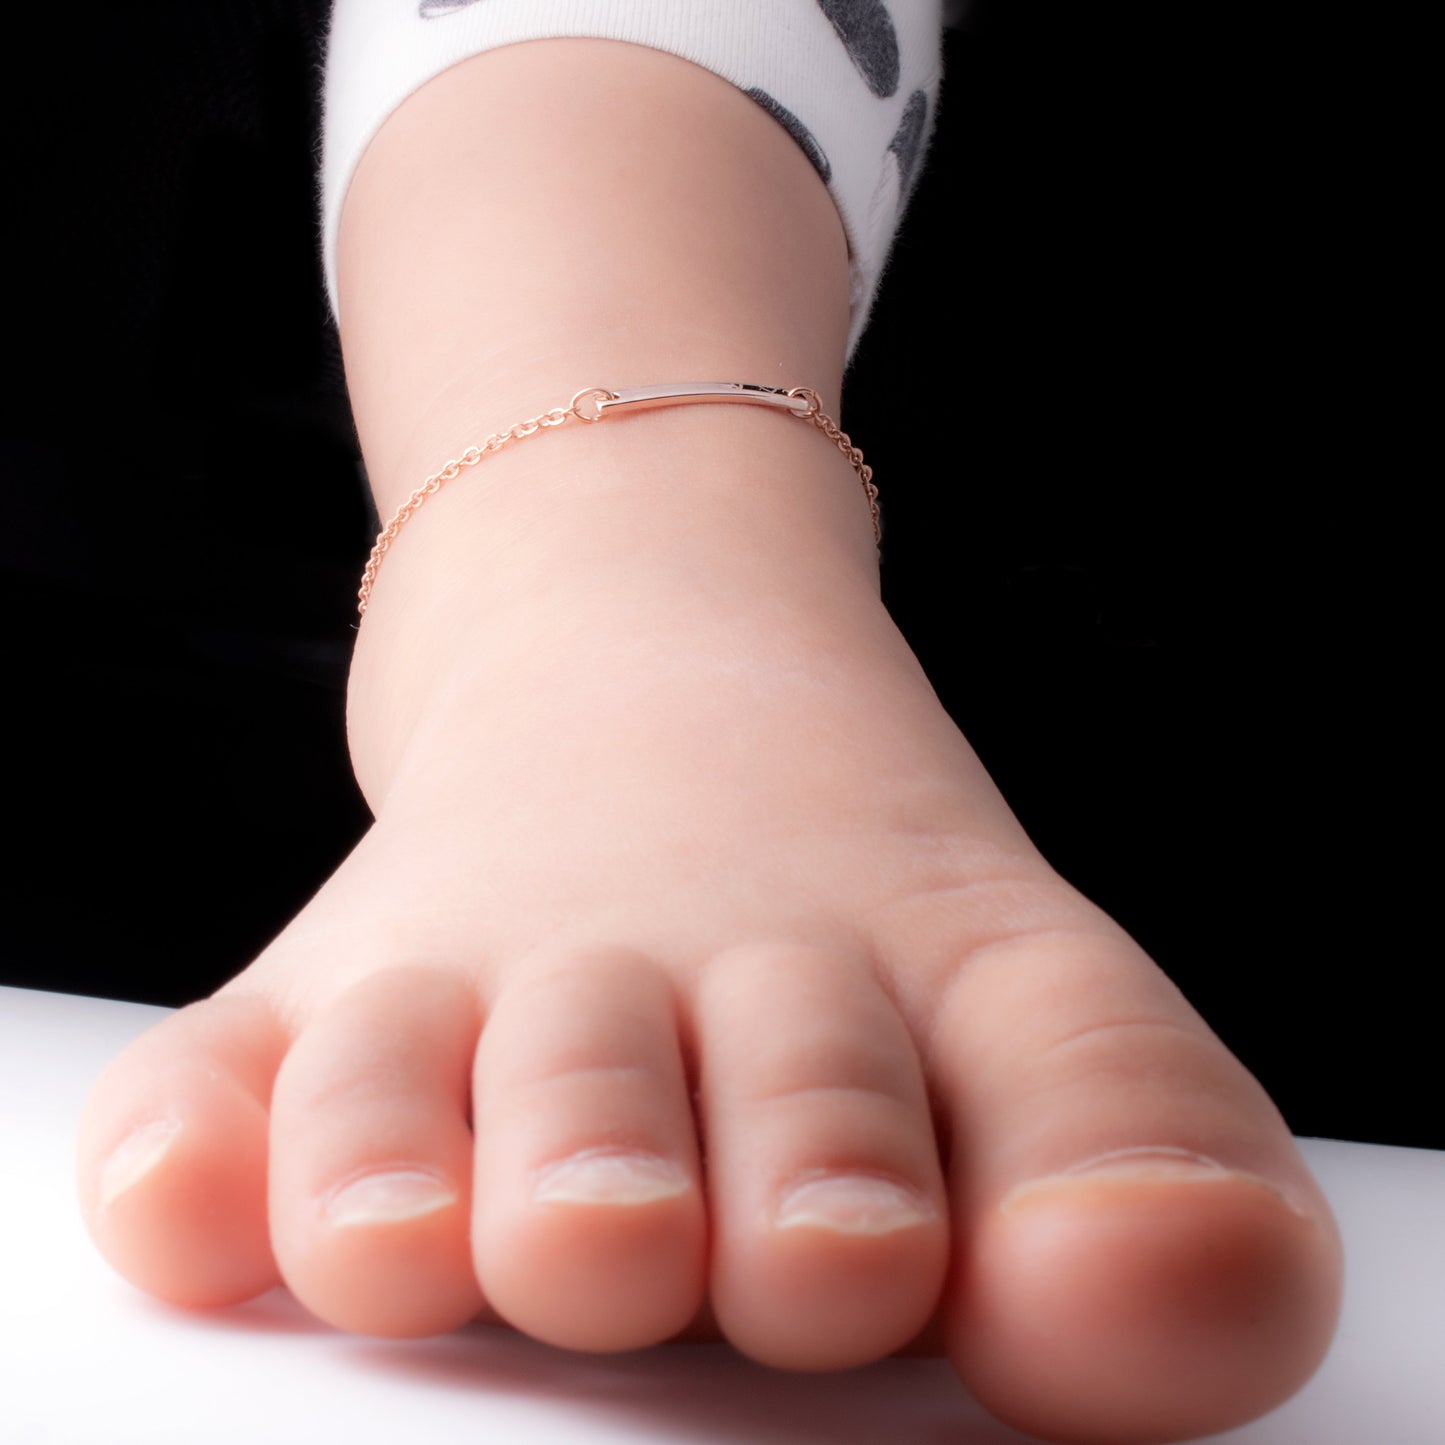 Personalized Baby Anklet Birthday gift Ideas for baby